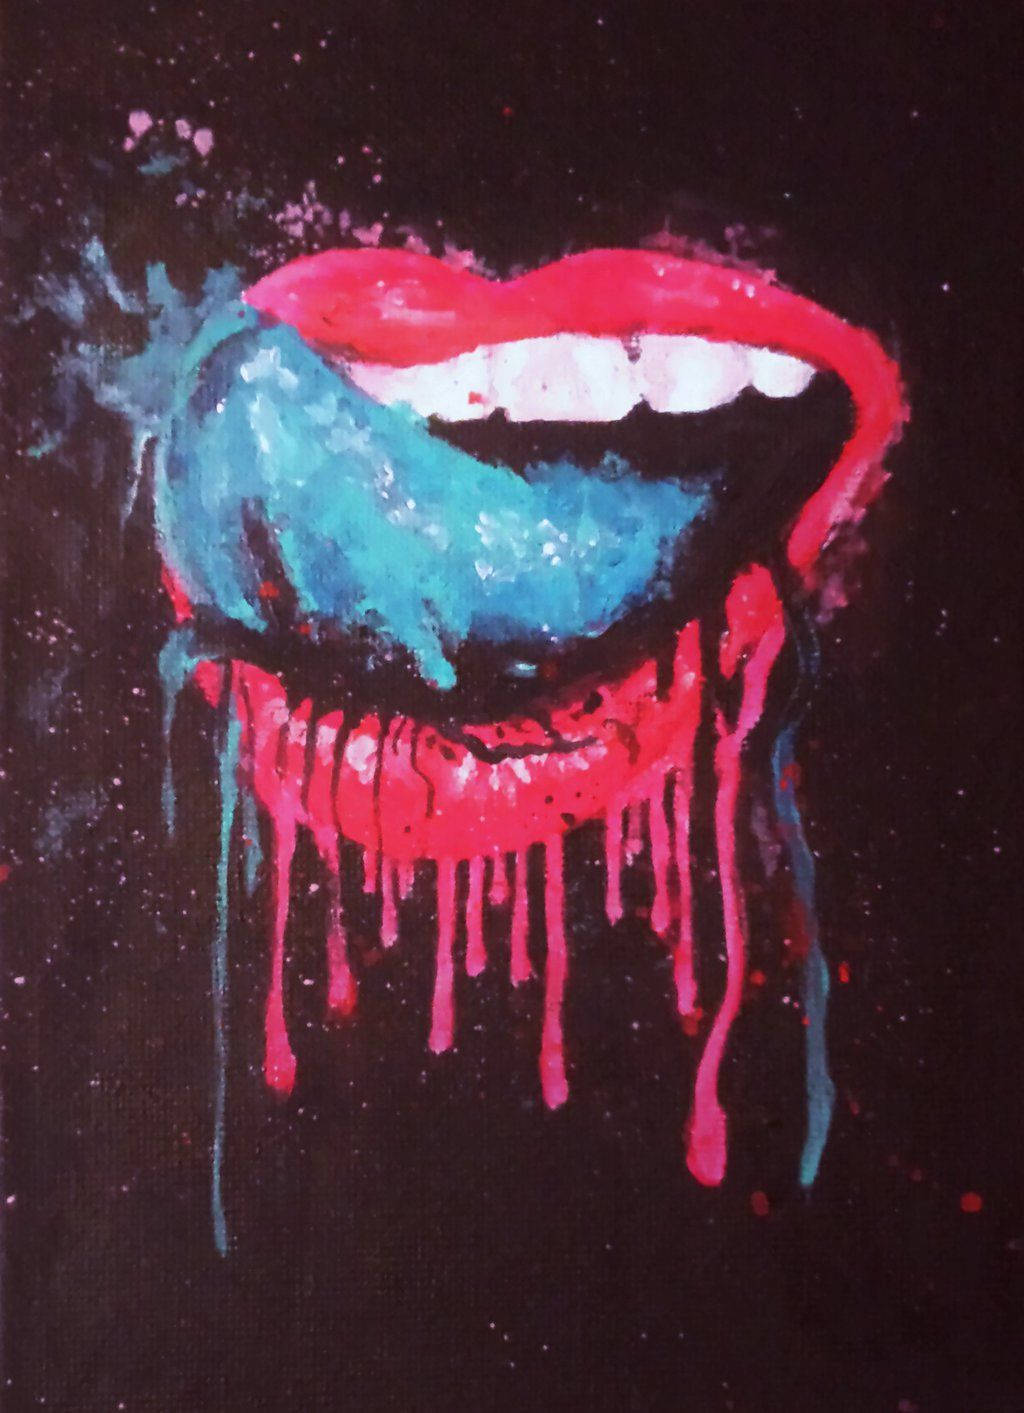 Stunning artwork of a cool dripping mouth Wallpaper